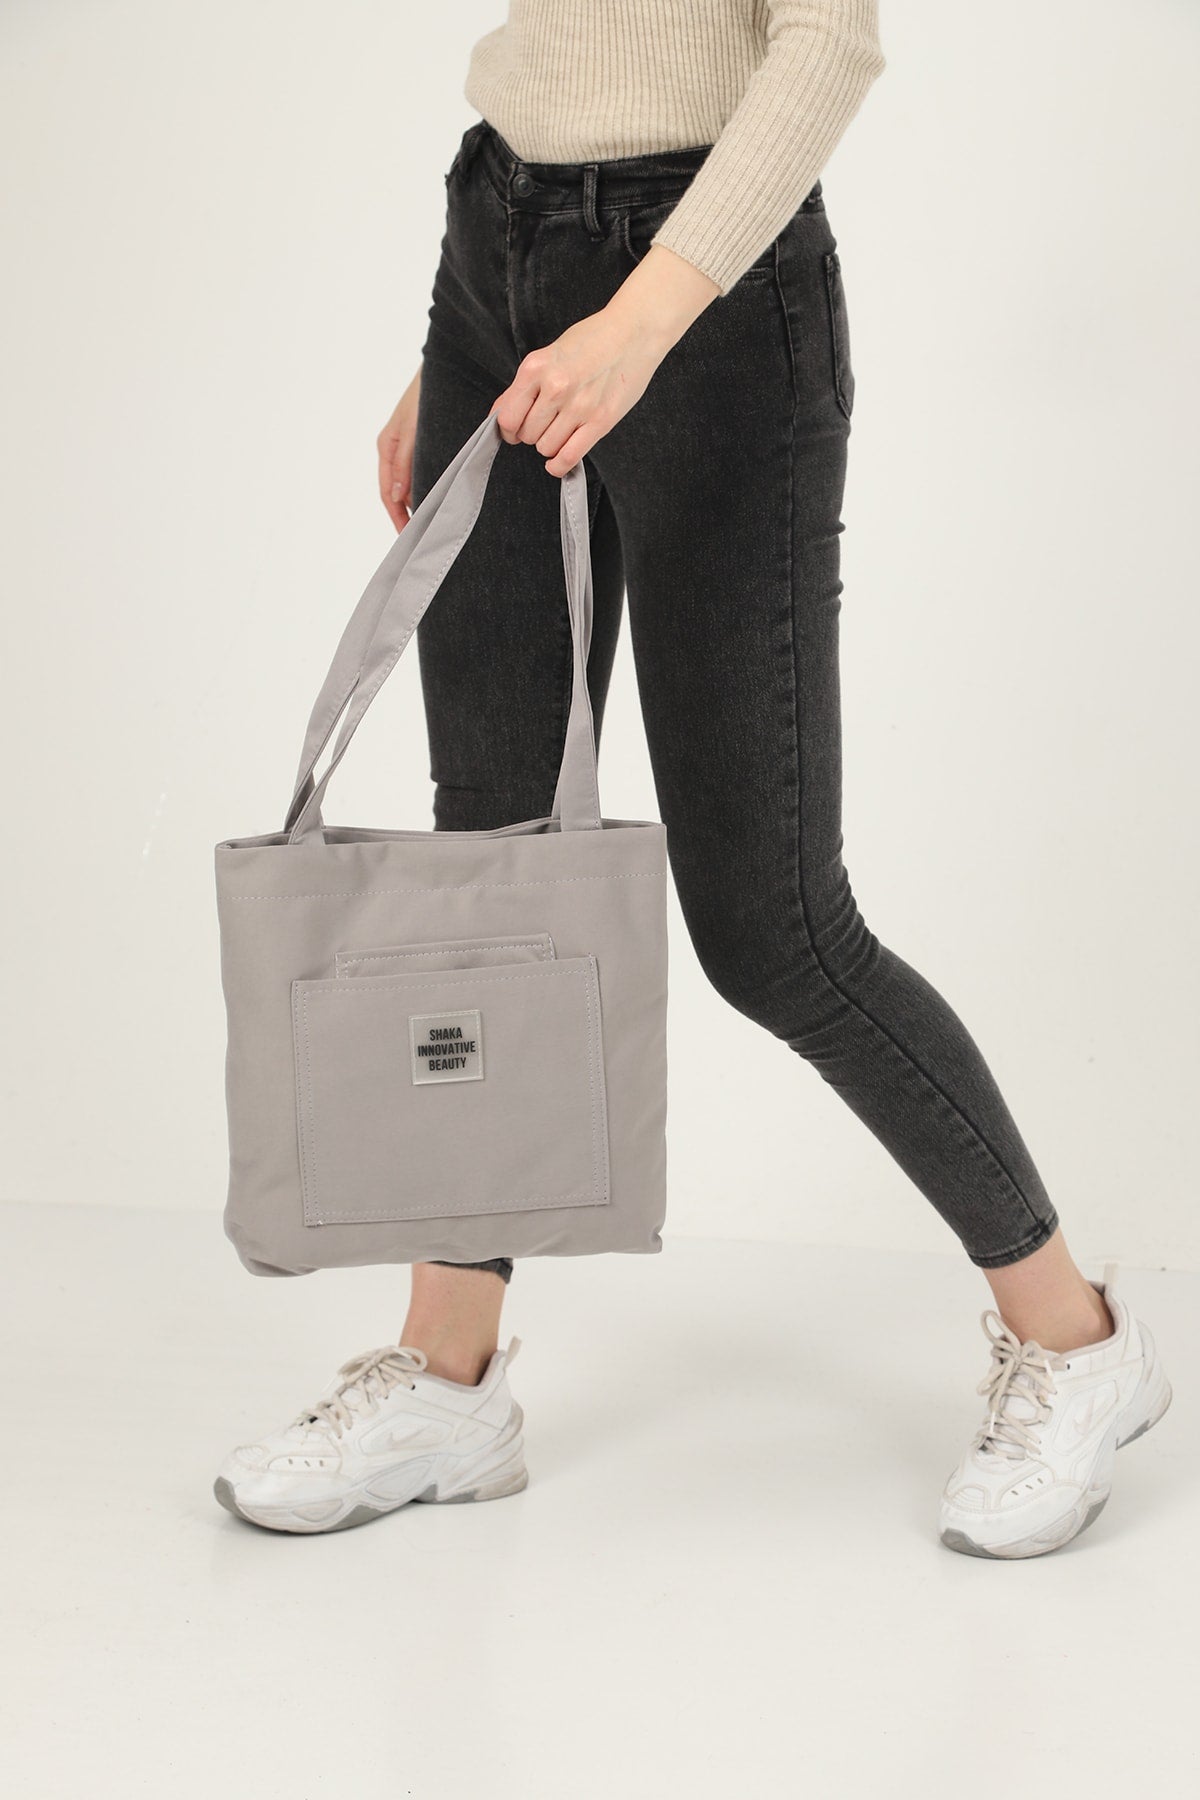 Gray U22 3-Compartment Front 2 Pocket Detailed Canvas Fabric Daily Women's Arm and Shoulder Bag B:35 E:35